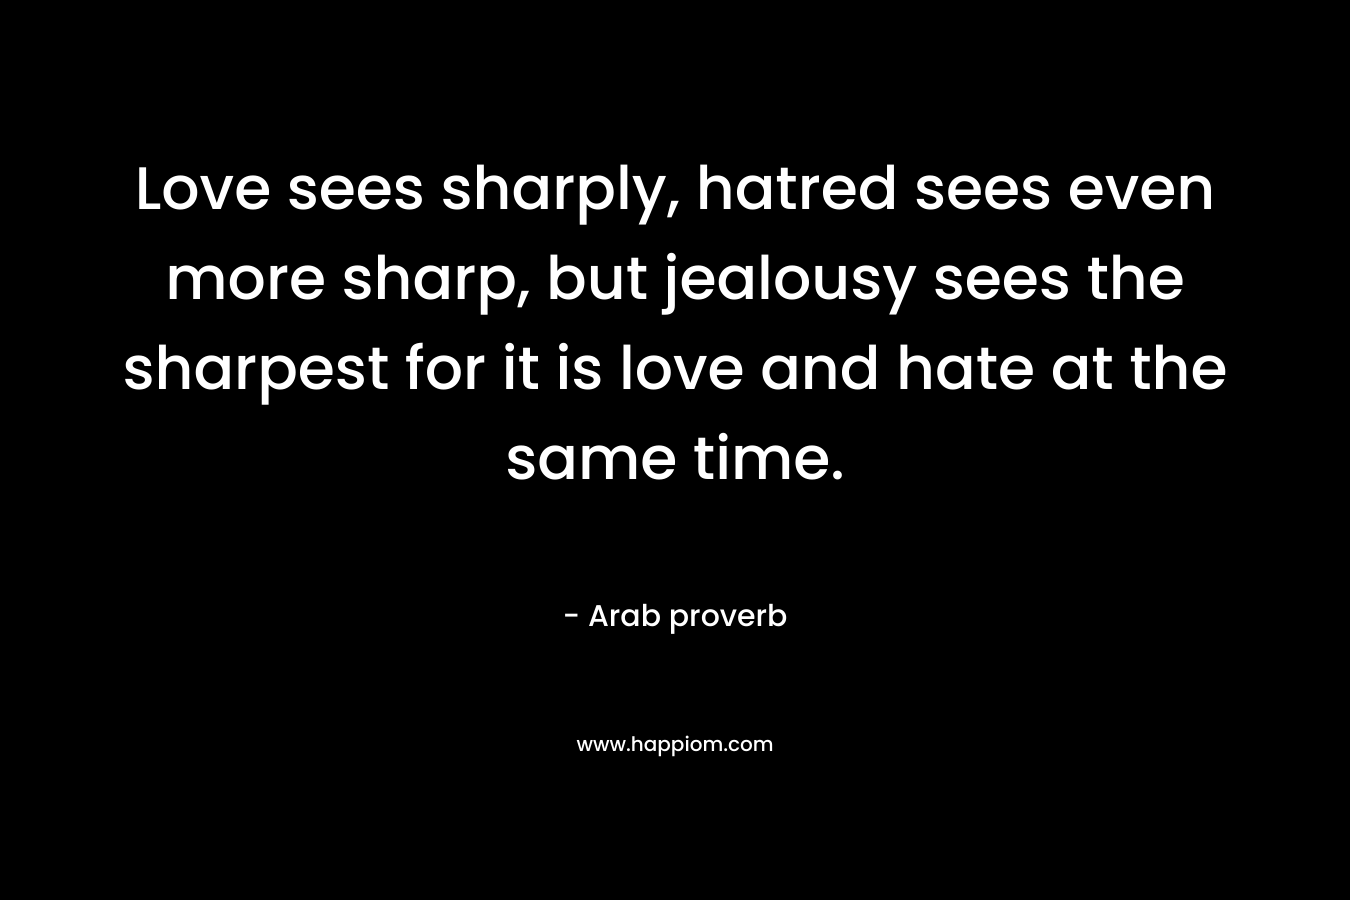 Love sees sharply, hatred sees even more sharp, but jealousy sees the sharpest for it is love and hate at the same time.